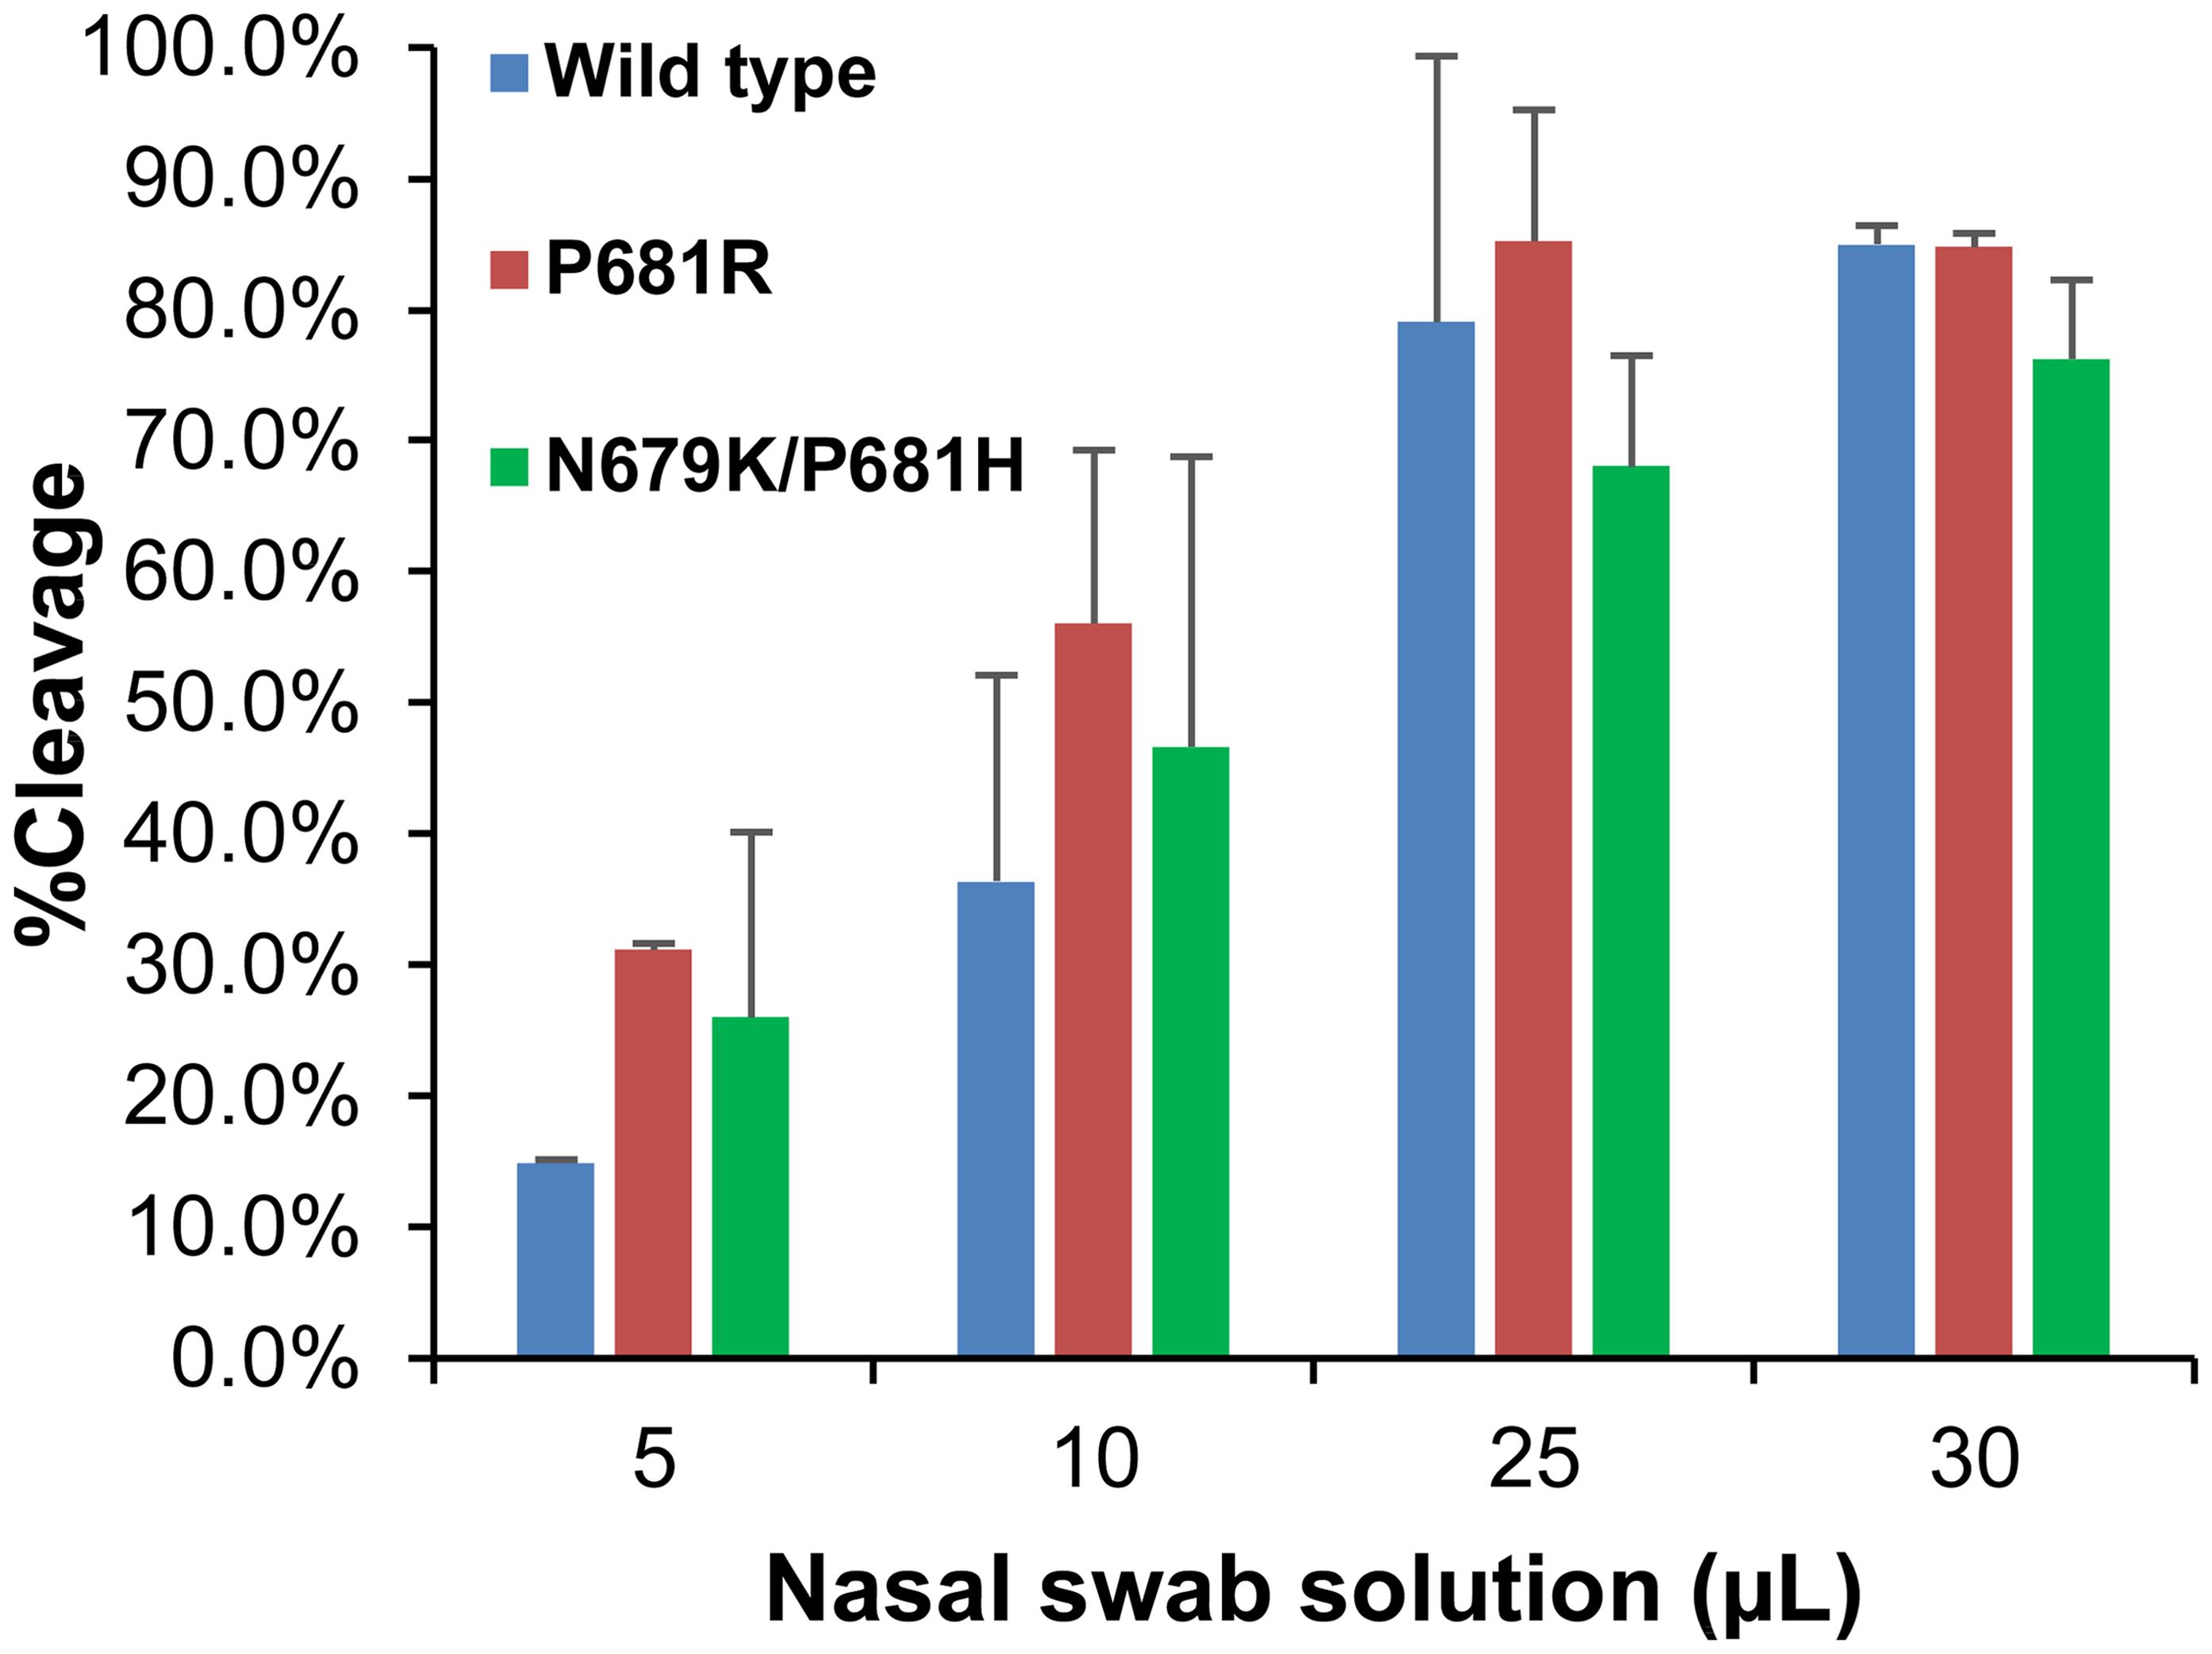 Cleavage of the SARS-CoV-2 wild-type, P681R, and N679K/P681H mutant FCS by the nasal swab sample at different amounts.